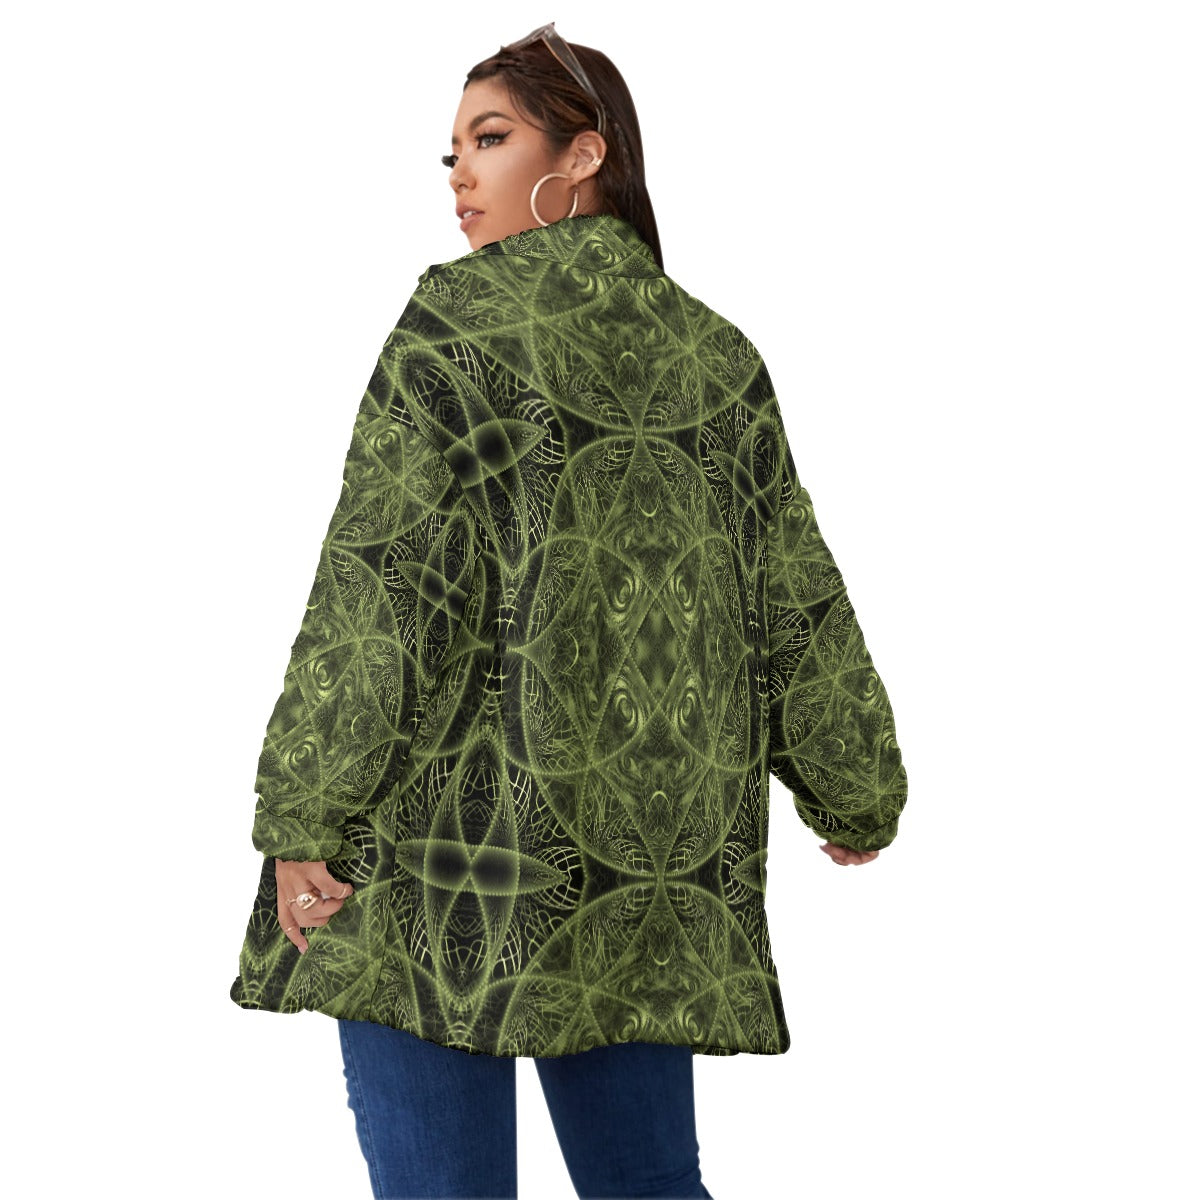 Warmth Redefined: Unisex Borg Fleece Plus Size Coat with Stand-up Collar